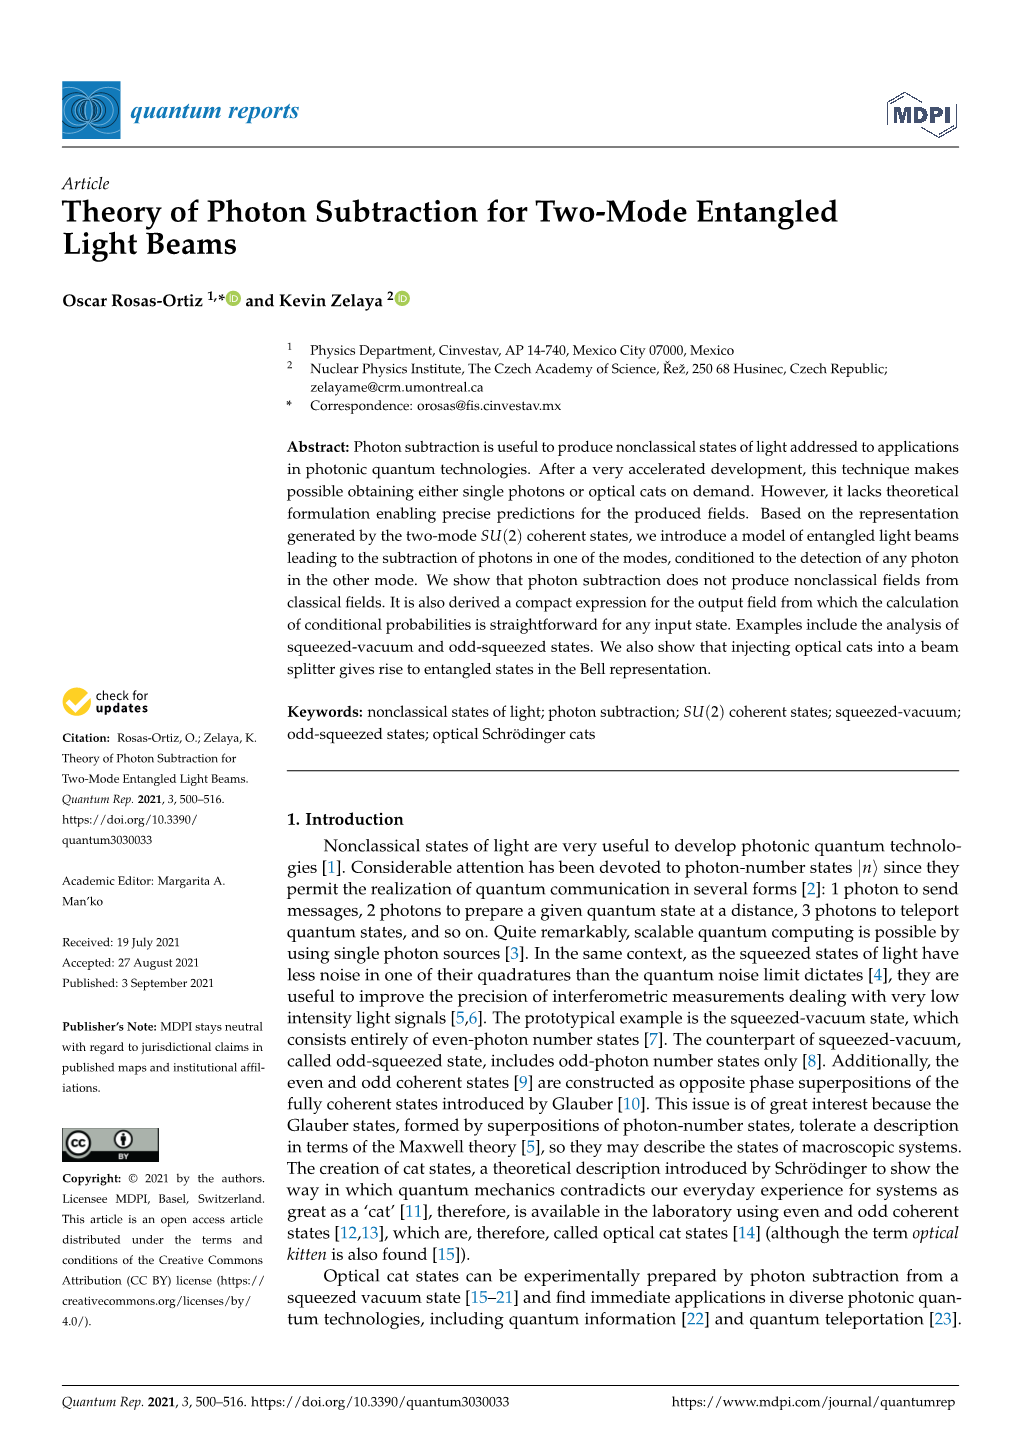 Theory of Photon Subtraction for Two-Mode Entangled Light Beams